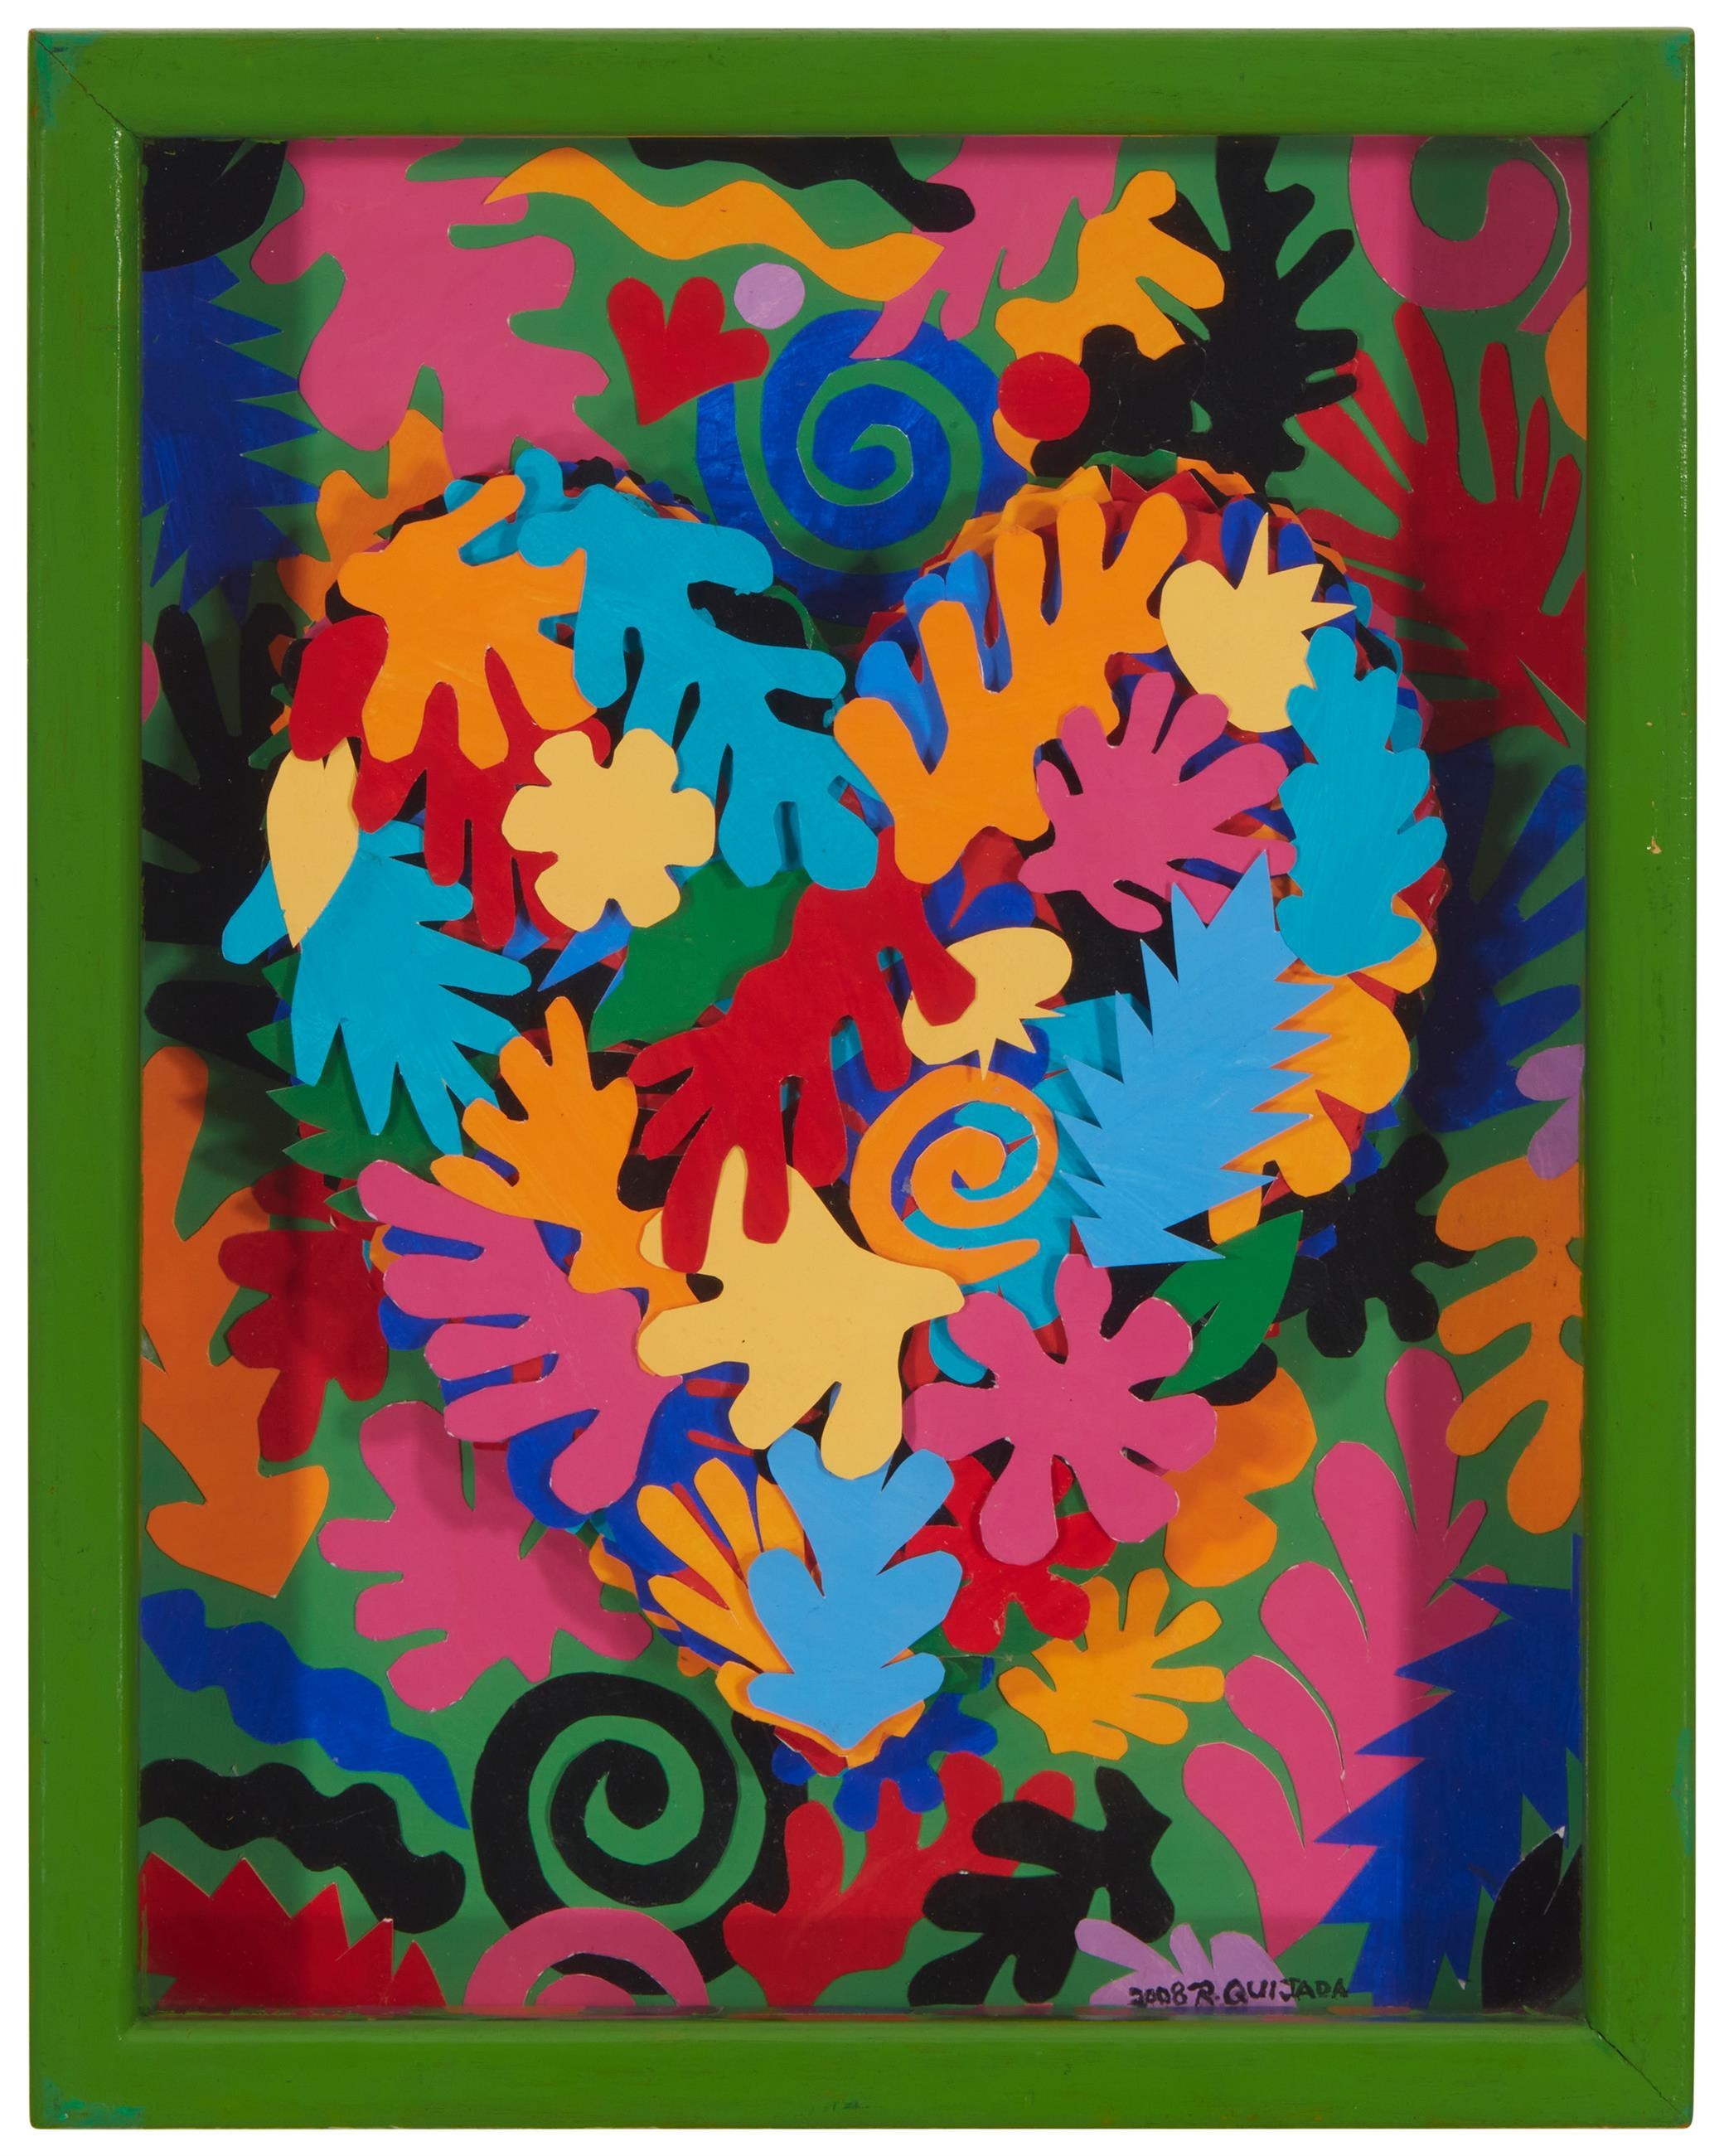 Artwork by Robert Quijada, The Heart Of Henri Matisse, Made of Three-dimensional painted-paper collage